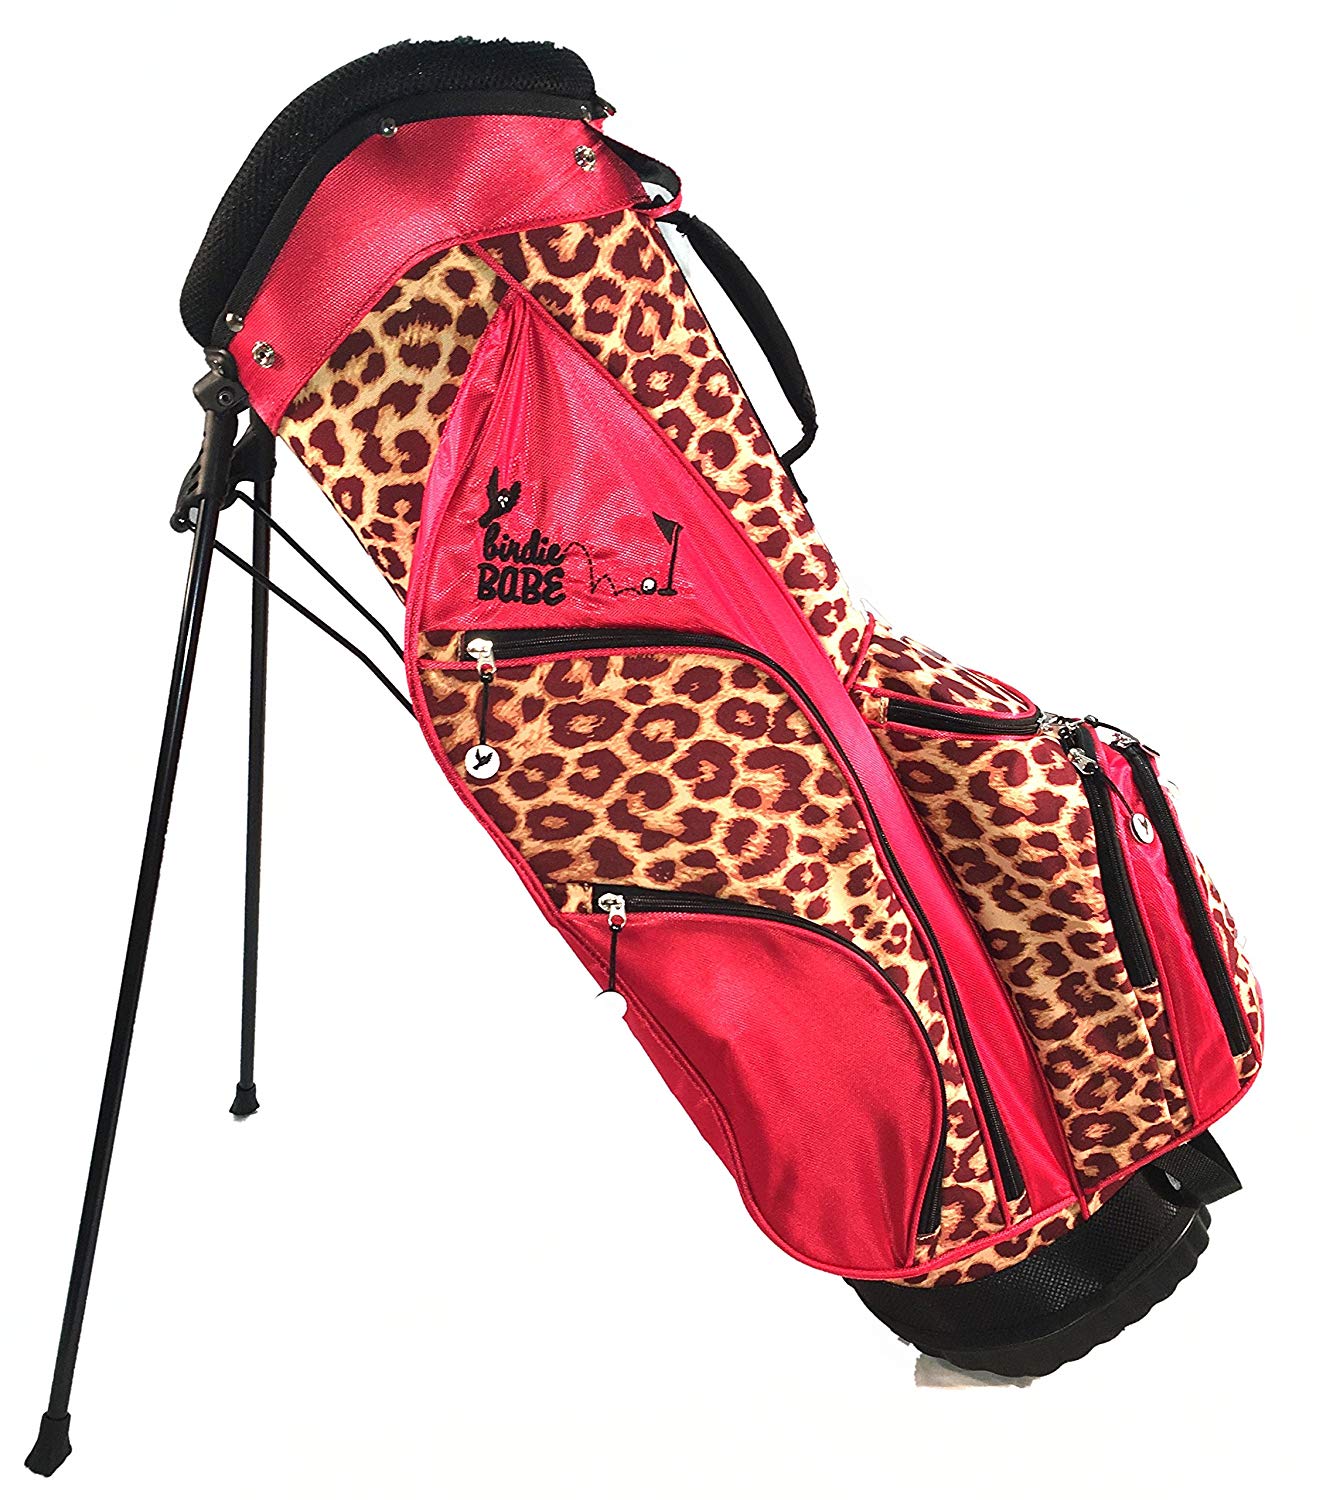 Womens Birdie Babe Red Leopard Hybrid Golf Stand Bags with Headcovers